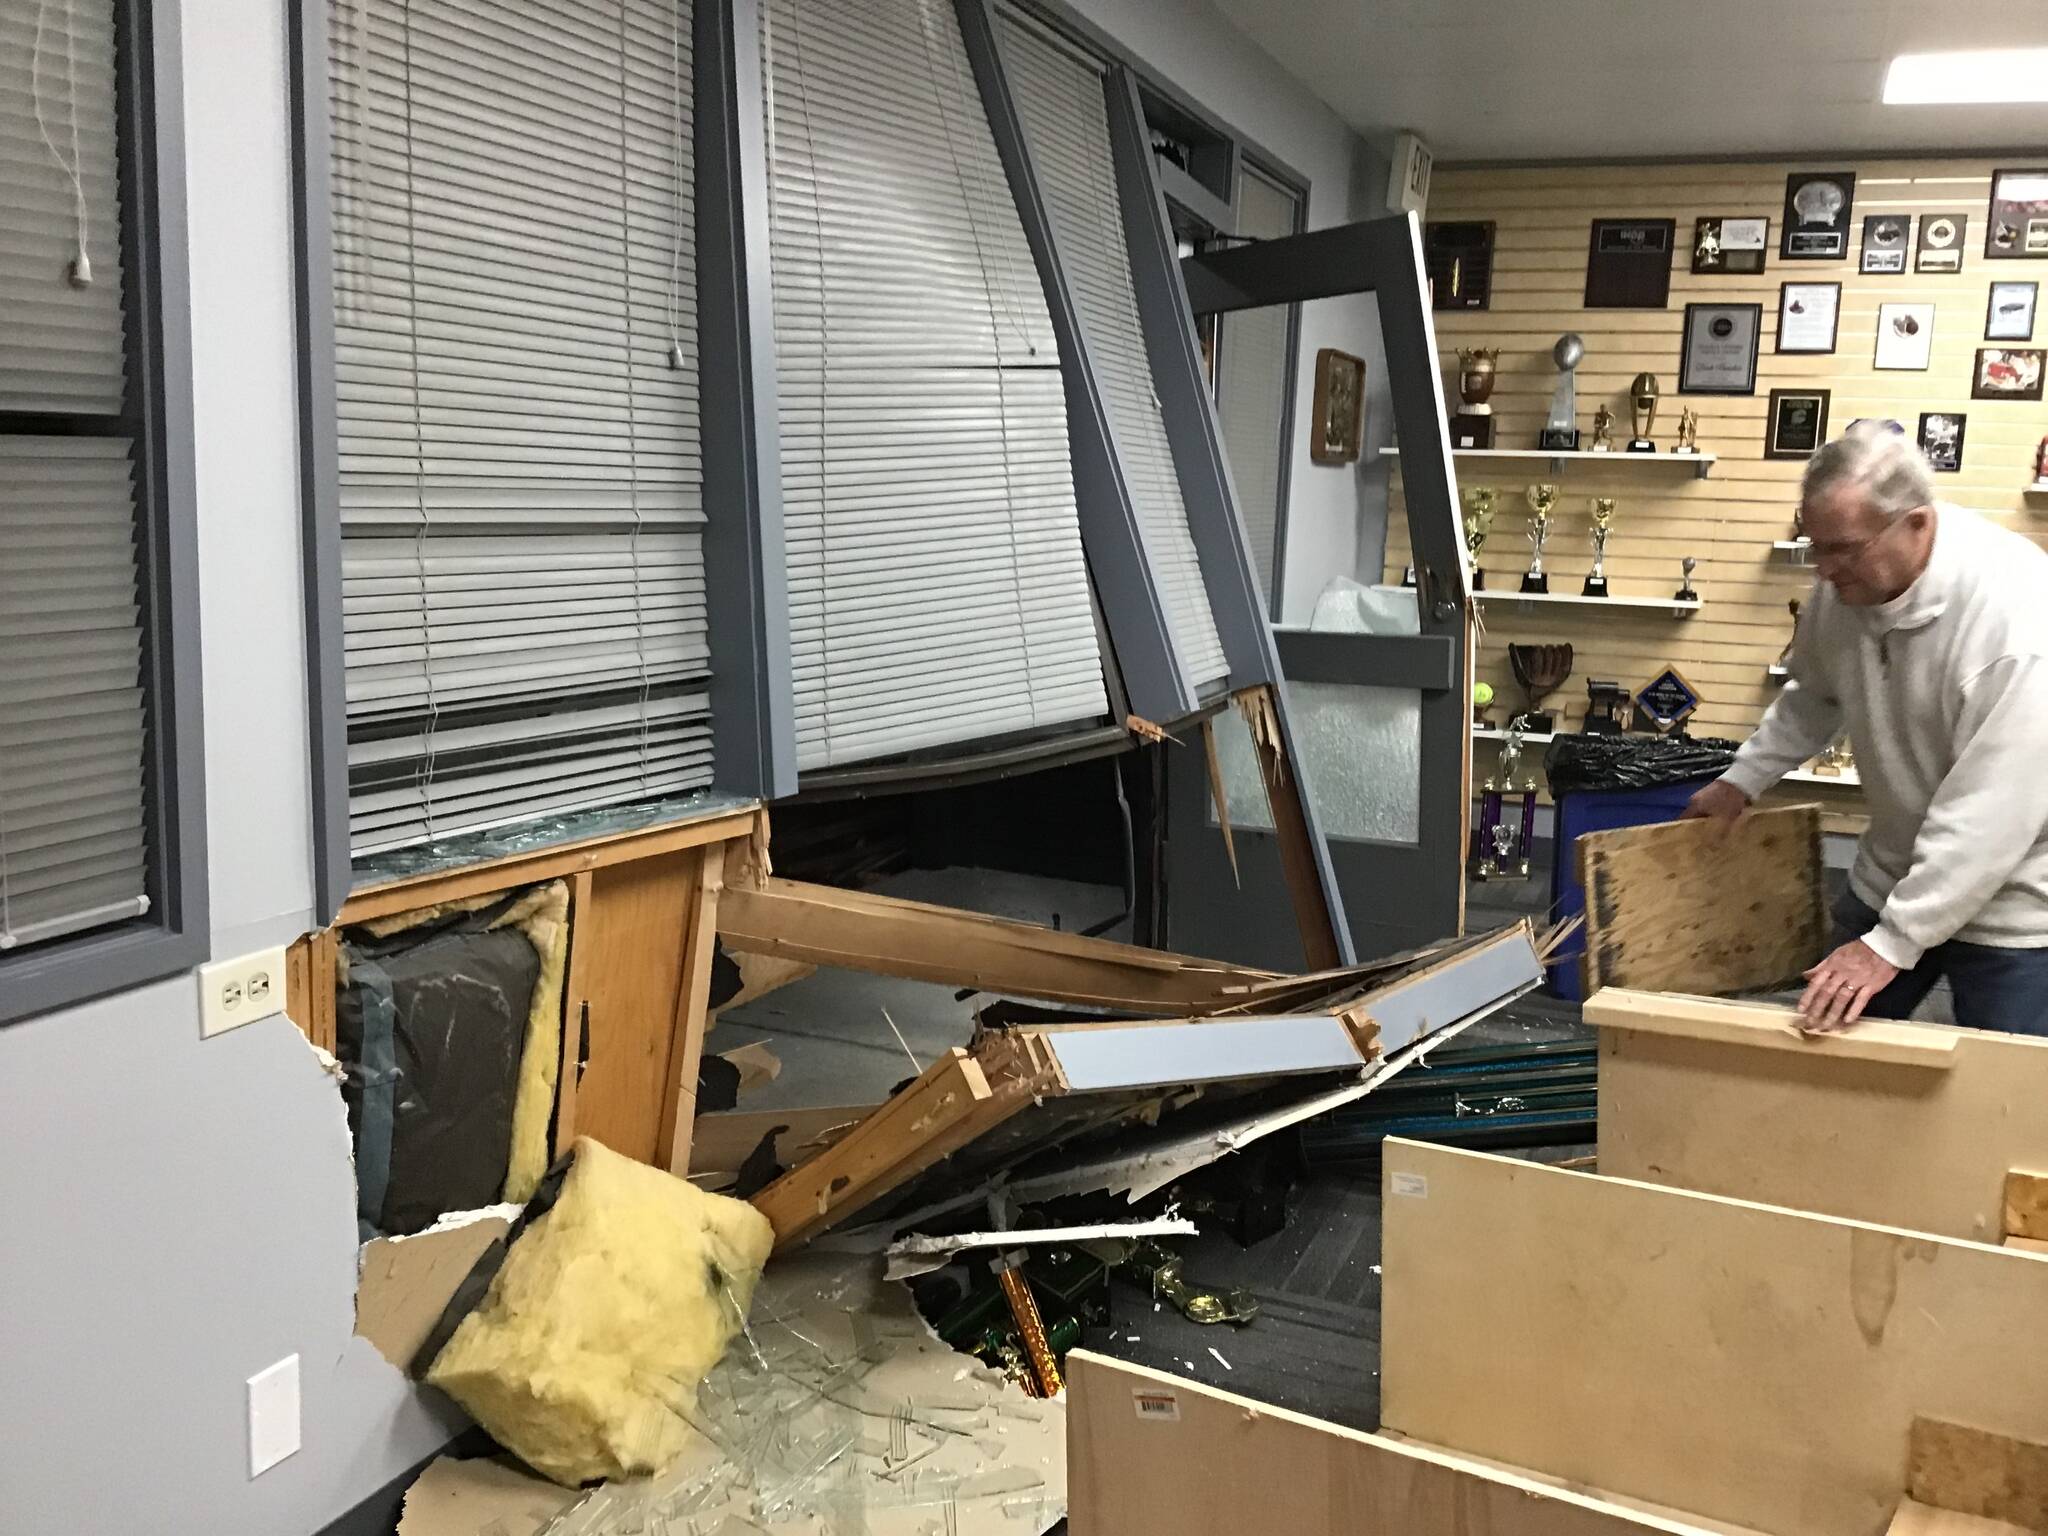 The front entrance to DJ Trophy, Awards & Engraving is heavily damaged after a suspect rammed a truck into the building and stole several items on Sept. 30. Photo courtesy of Jan Pool